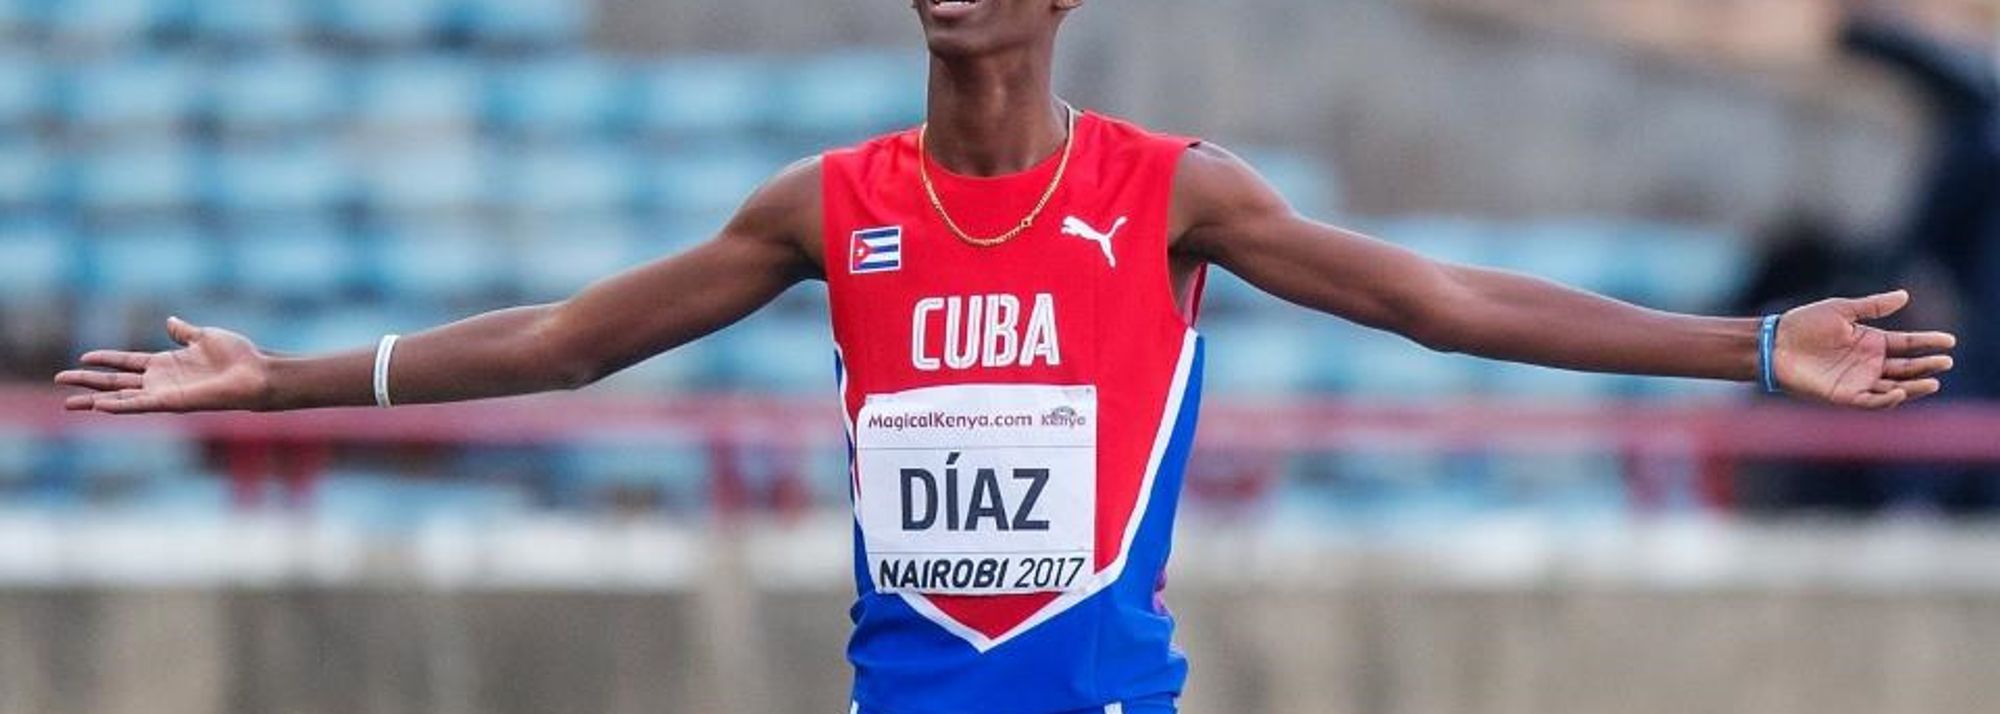 Cuba has developed such a strong culture of triple jumping that the hop, skip and jump has almost become synonymous with the blue and white stripes of the Caribbean nation’s flag.